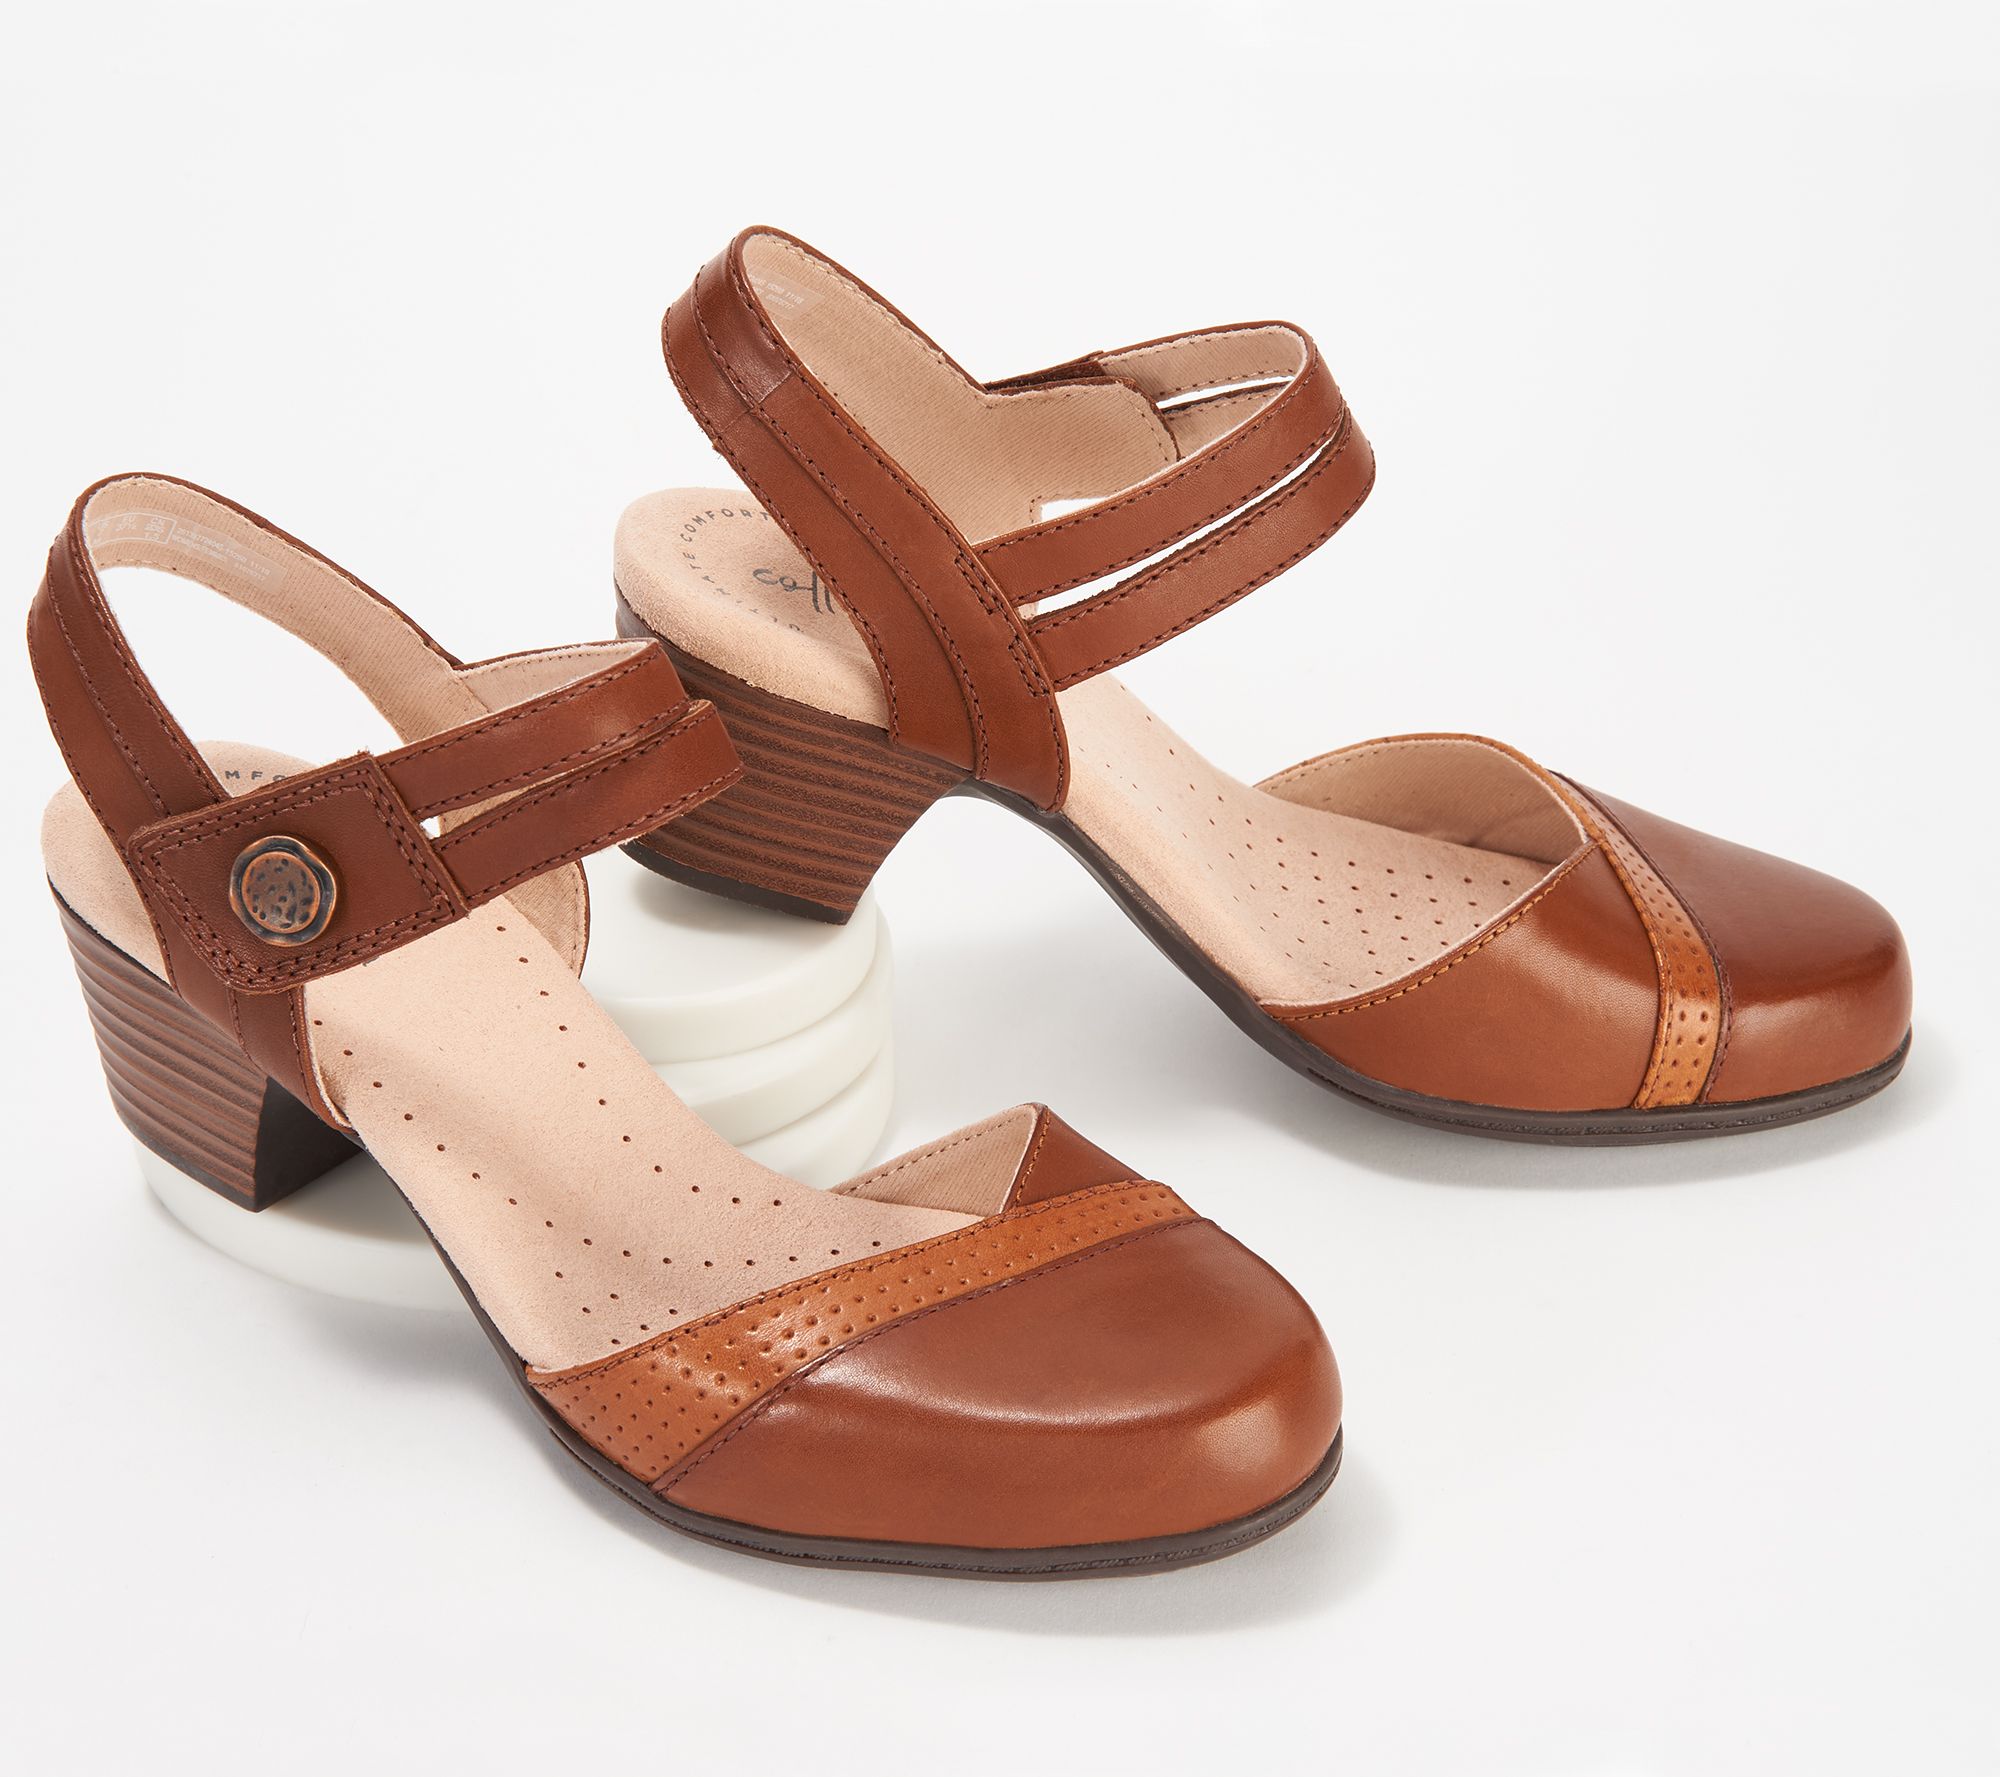 clarks mary jane shoes